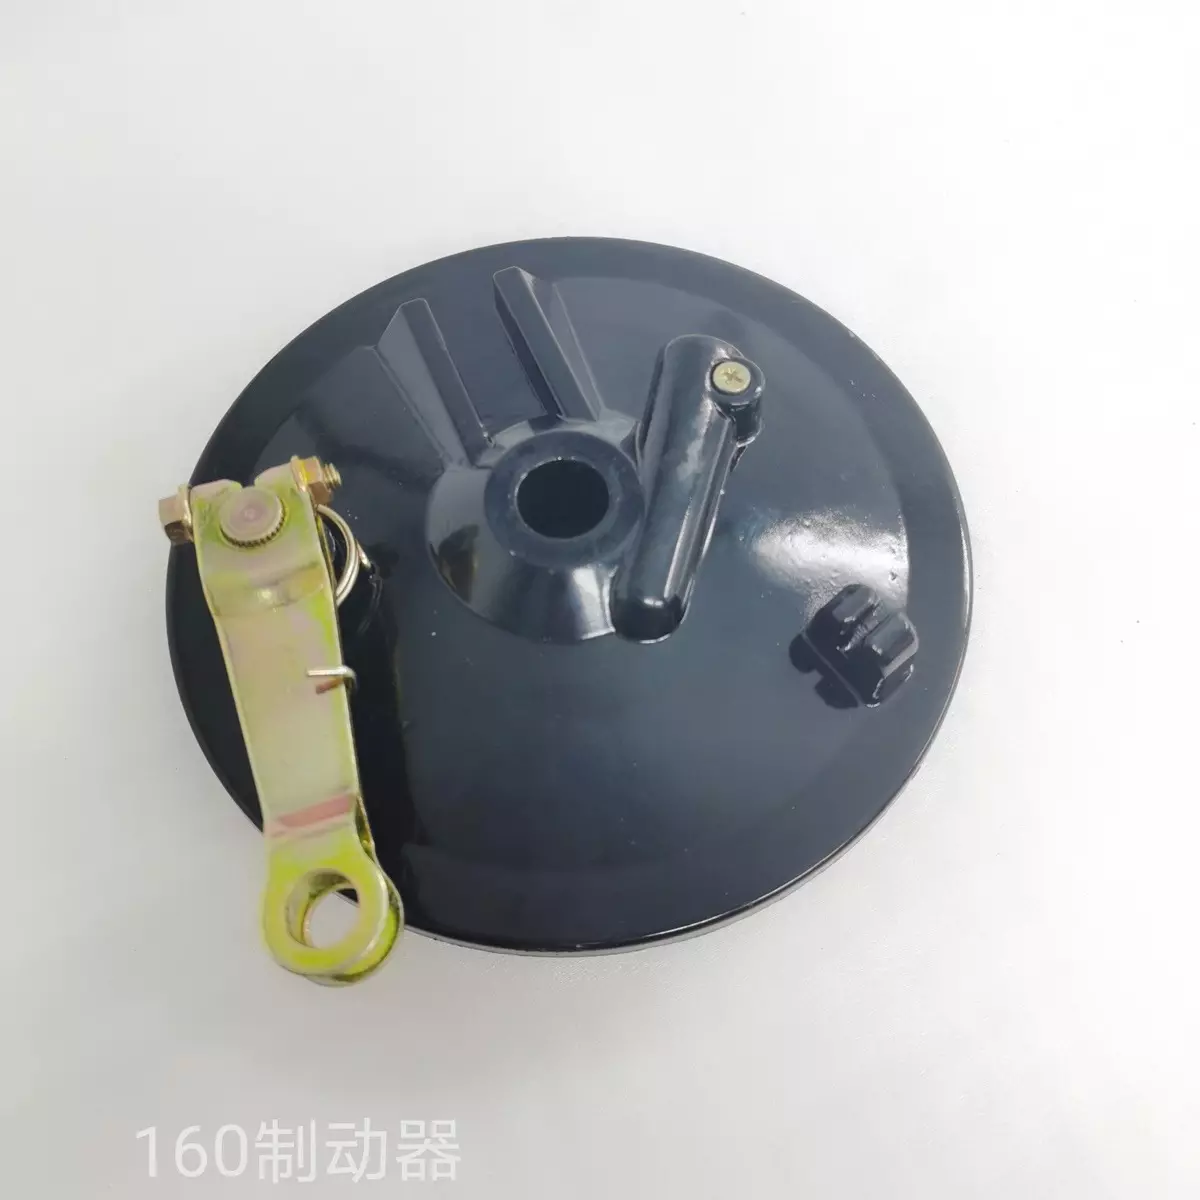 DAYANG BEIYI Motorcycle Spare Parts  Custom Motorcycle Parts Factory 160 brake Machined Customized Pieces Origin